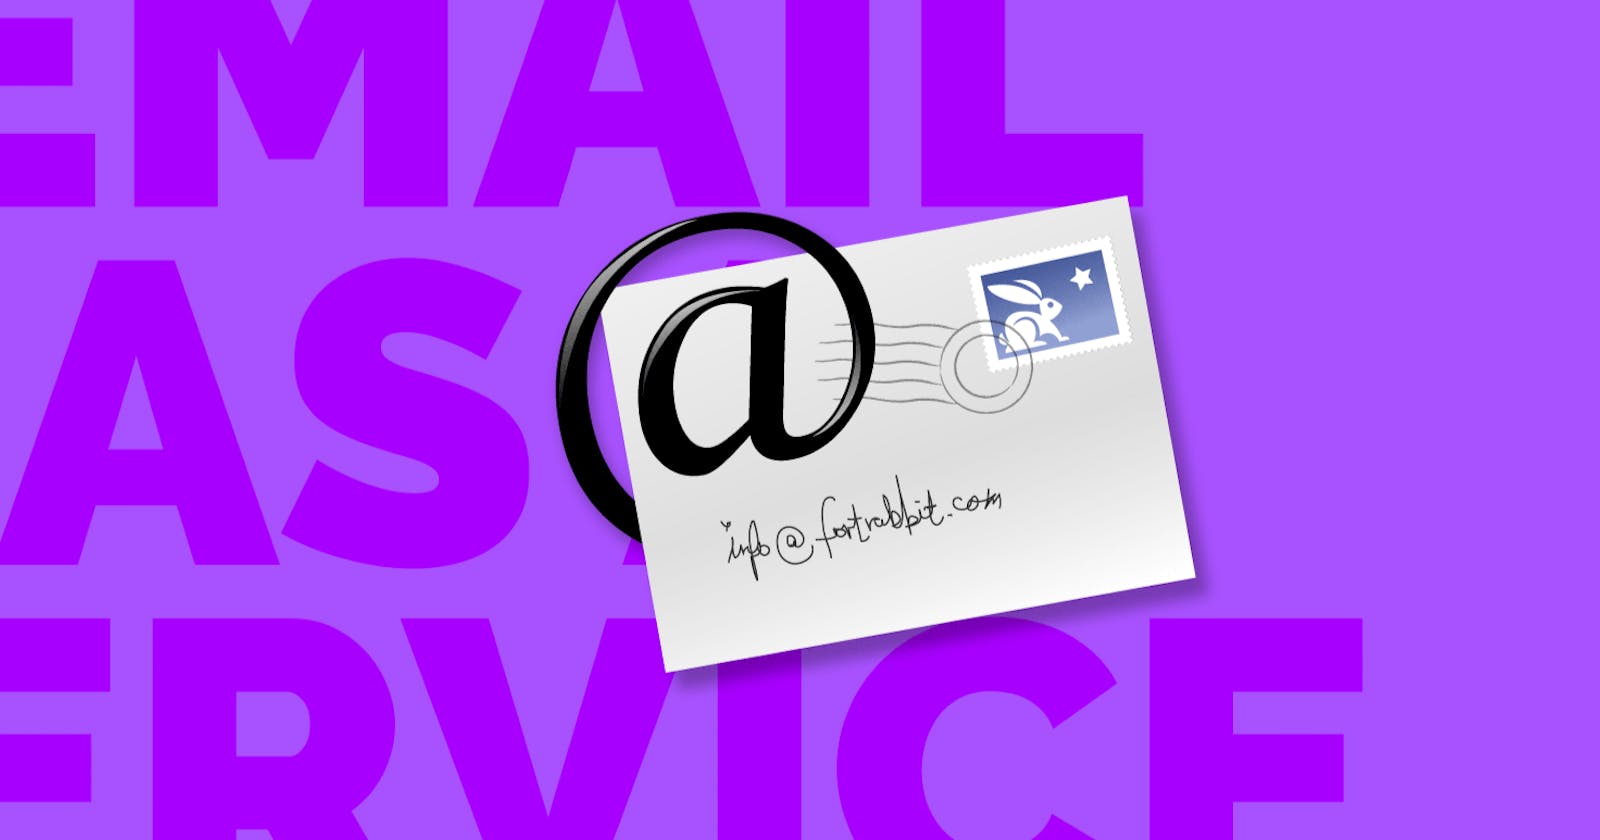 Email as a Service — which mailbox hosting for small business